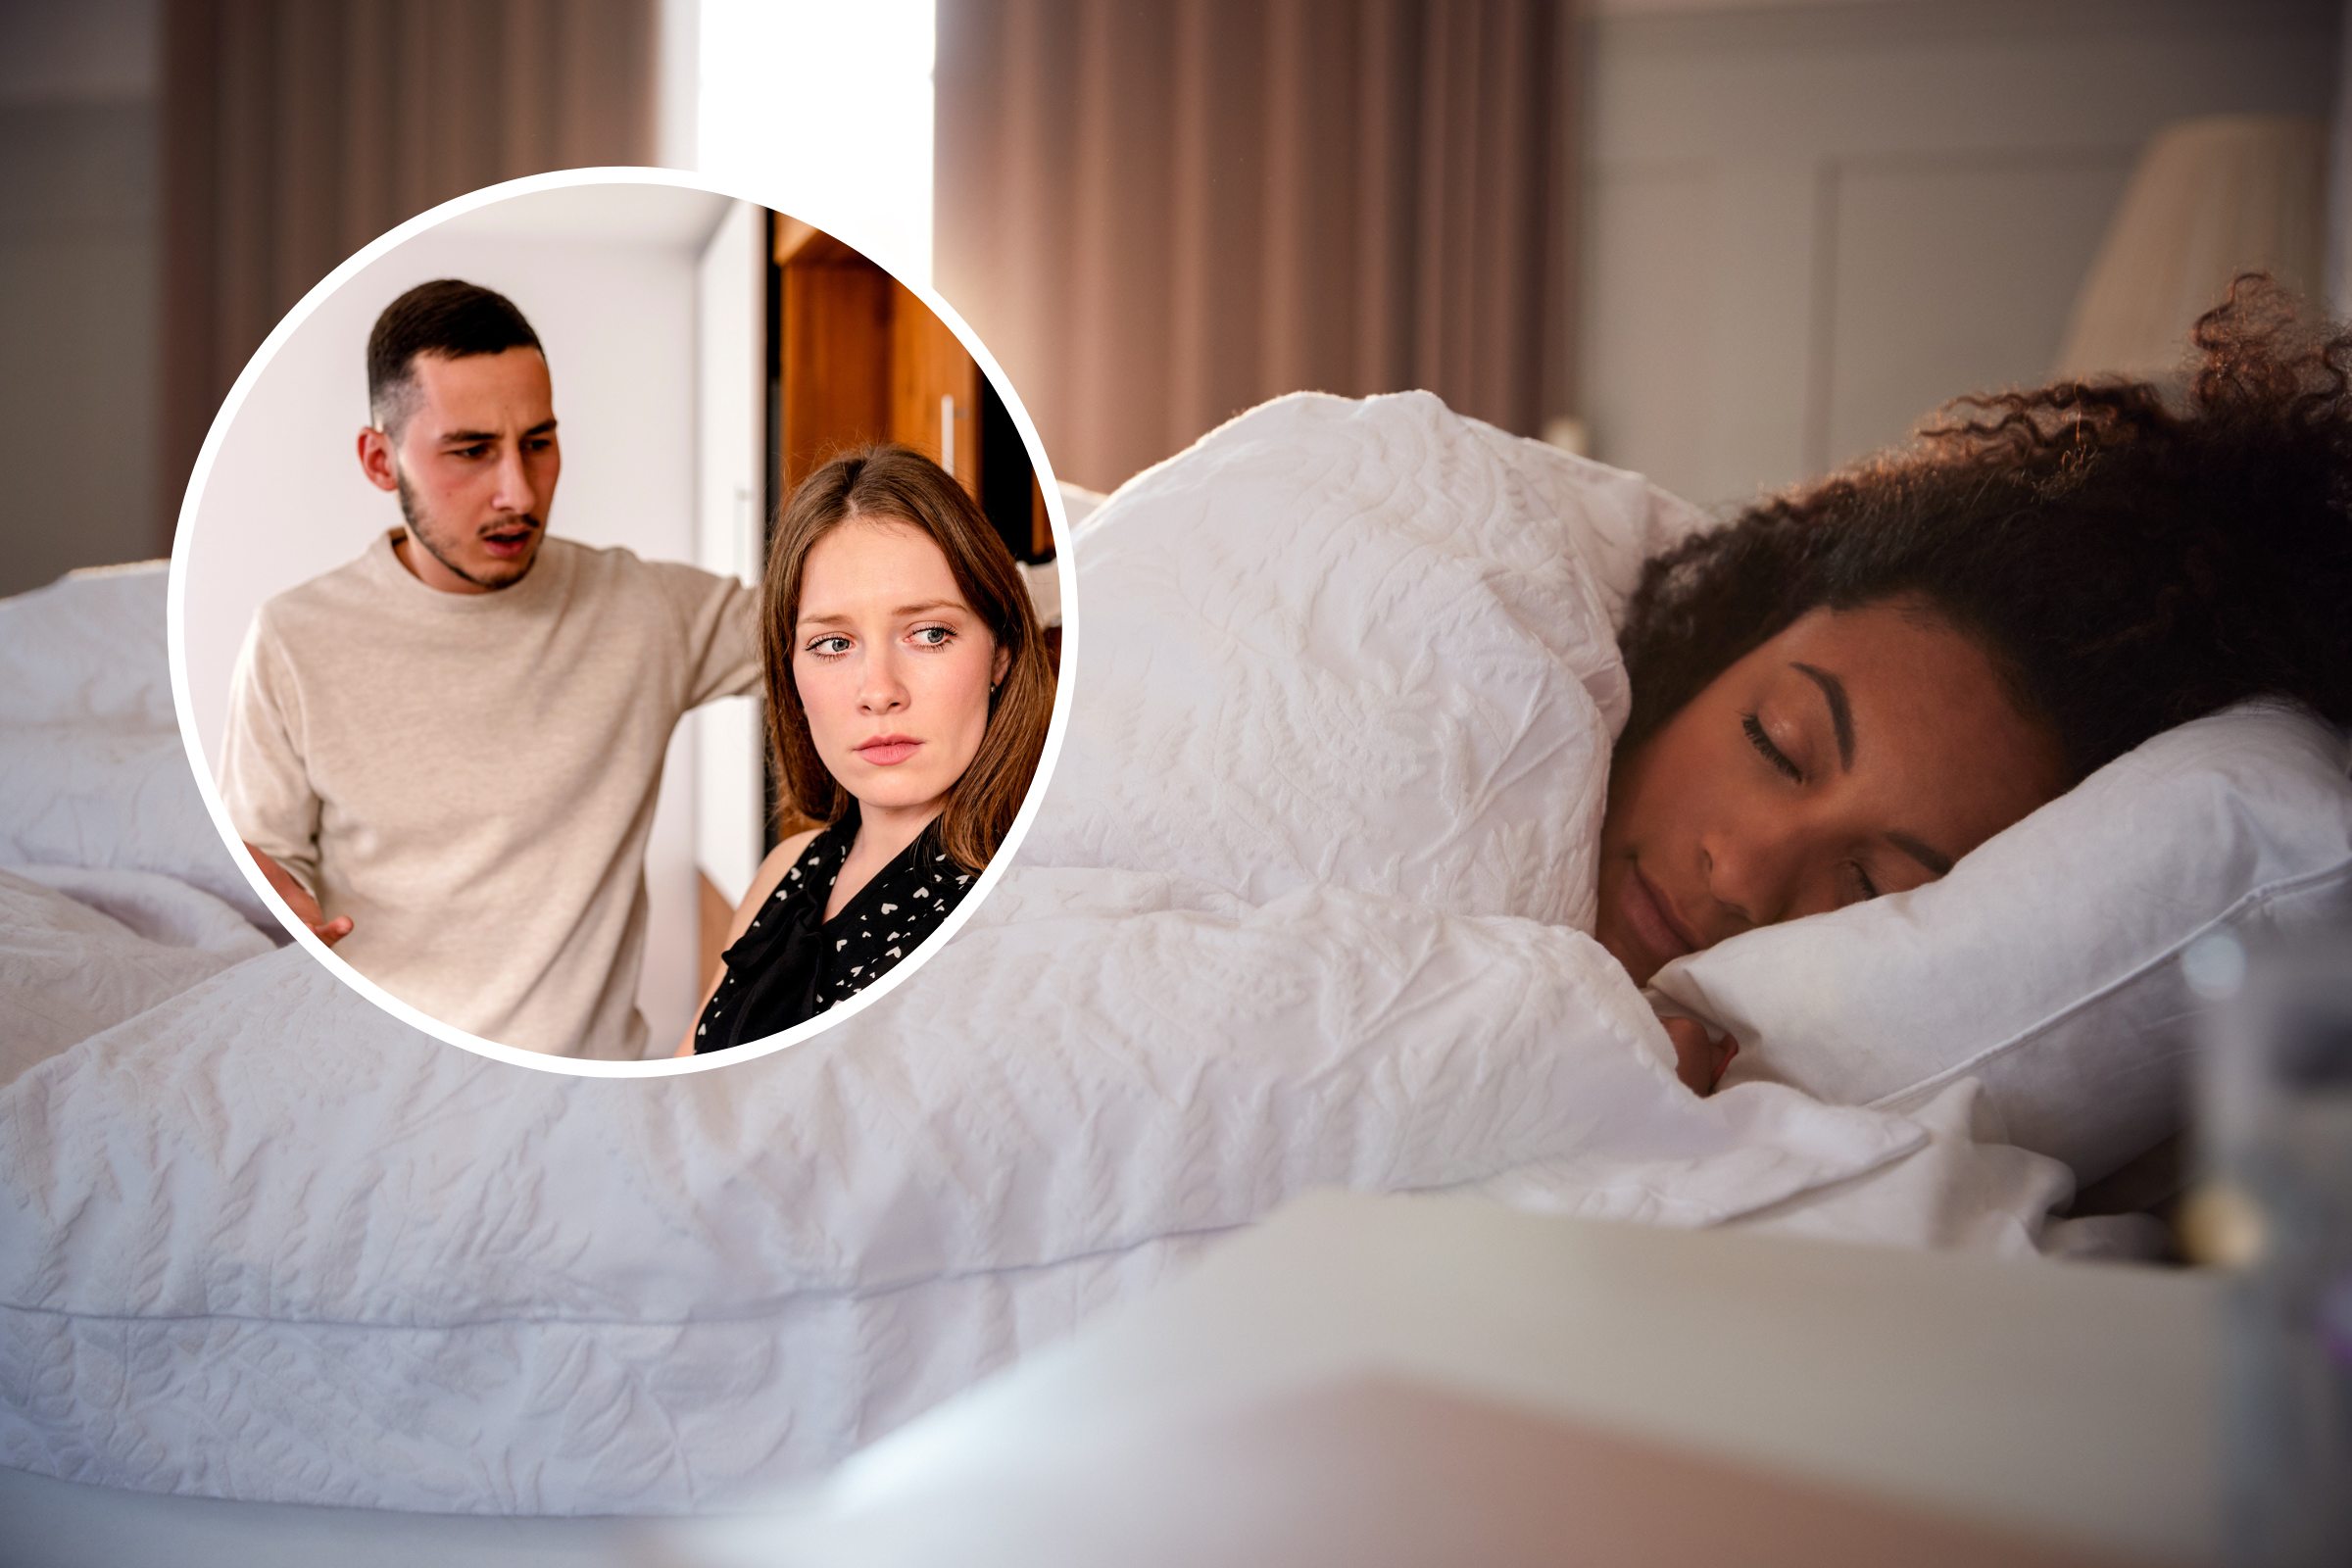 Man Kicking Girlfriends Sister Out of Bed Cheered—My House Isnt a Hotel